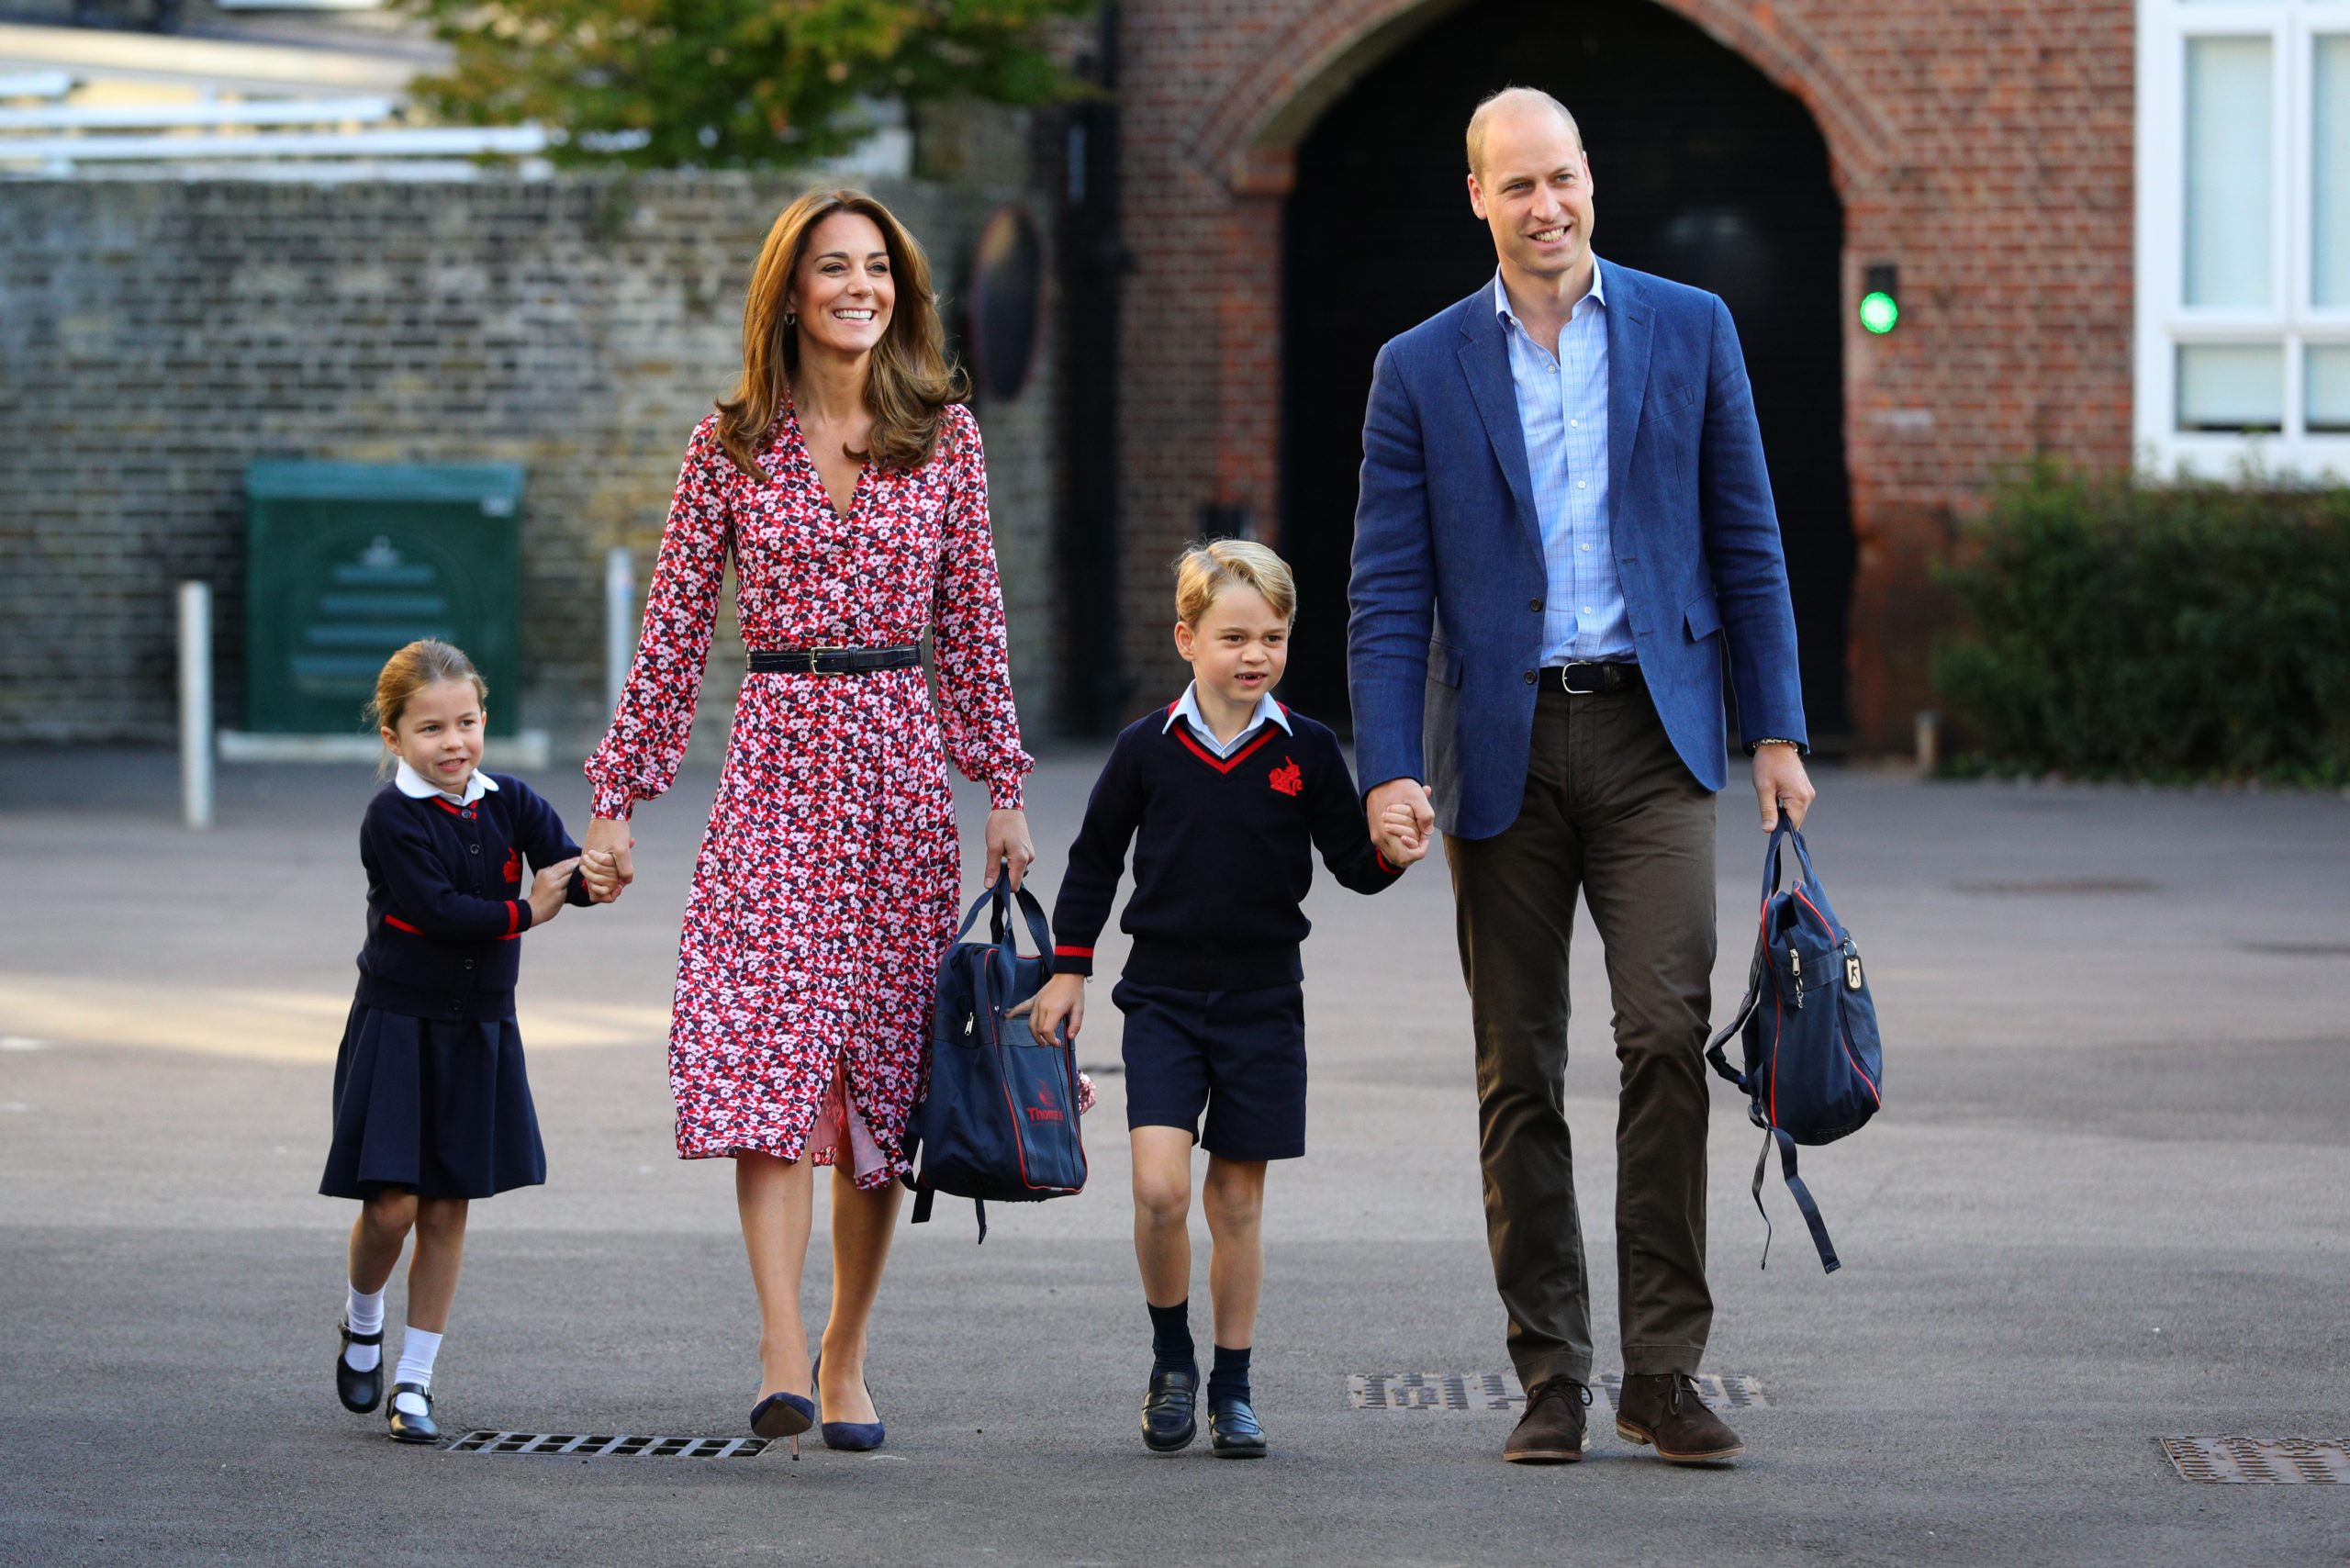 LONDON, UNITED KINGDOM – SEPTEMBER 5: Princess Charlotte arrives for her first day of school, with her brother Prince George and her parents the Duke and Duchess of Cambridge, at Thomas’s Battersea in London on September 5, 2019 in London, England. (Photo by Aaron Chown – WPA Pool/Getty Images)